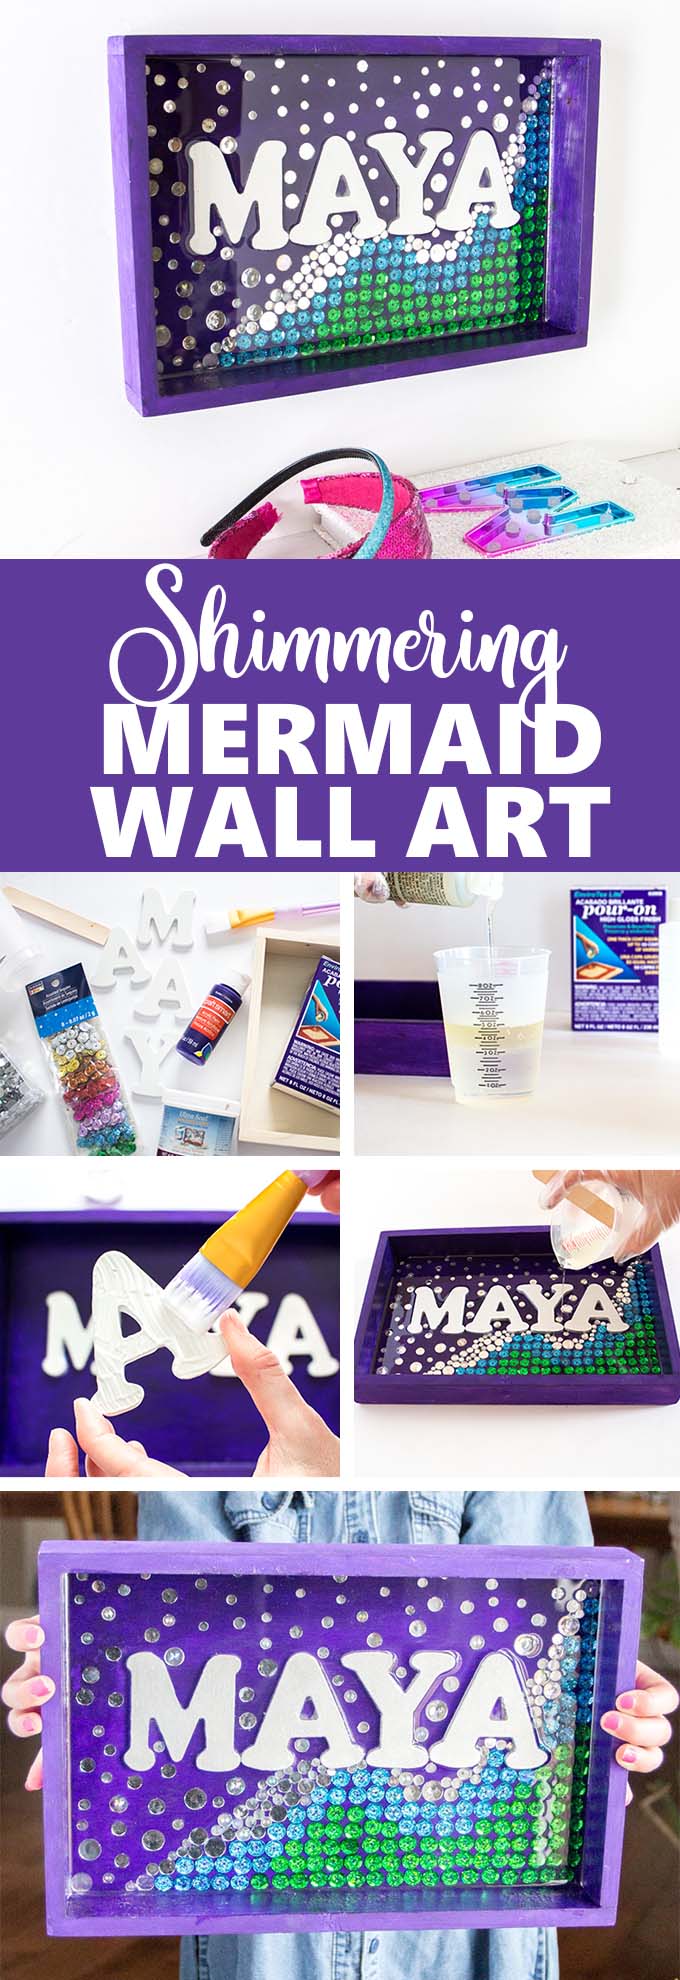 So pretty for a girl's bedroom! Shimmering mermaid wall art name plate with resin. #envirotexlite #resincrafts #resincraftsblog